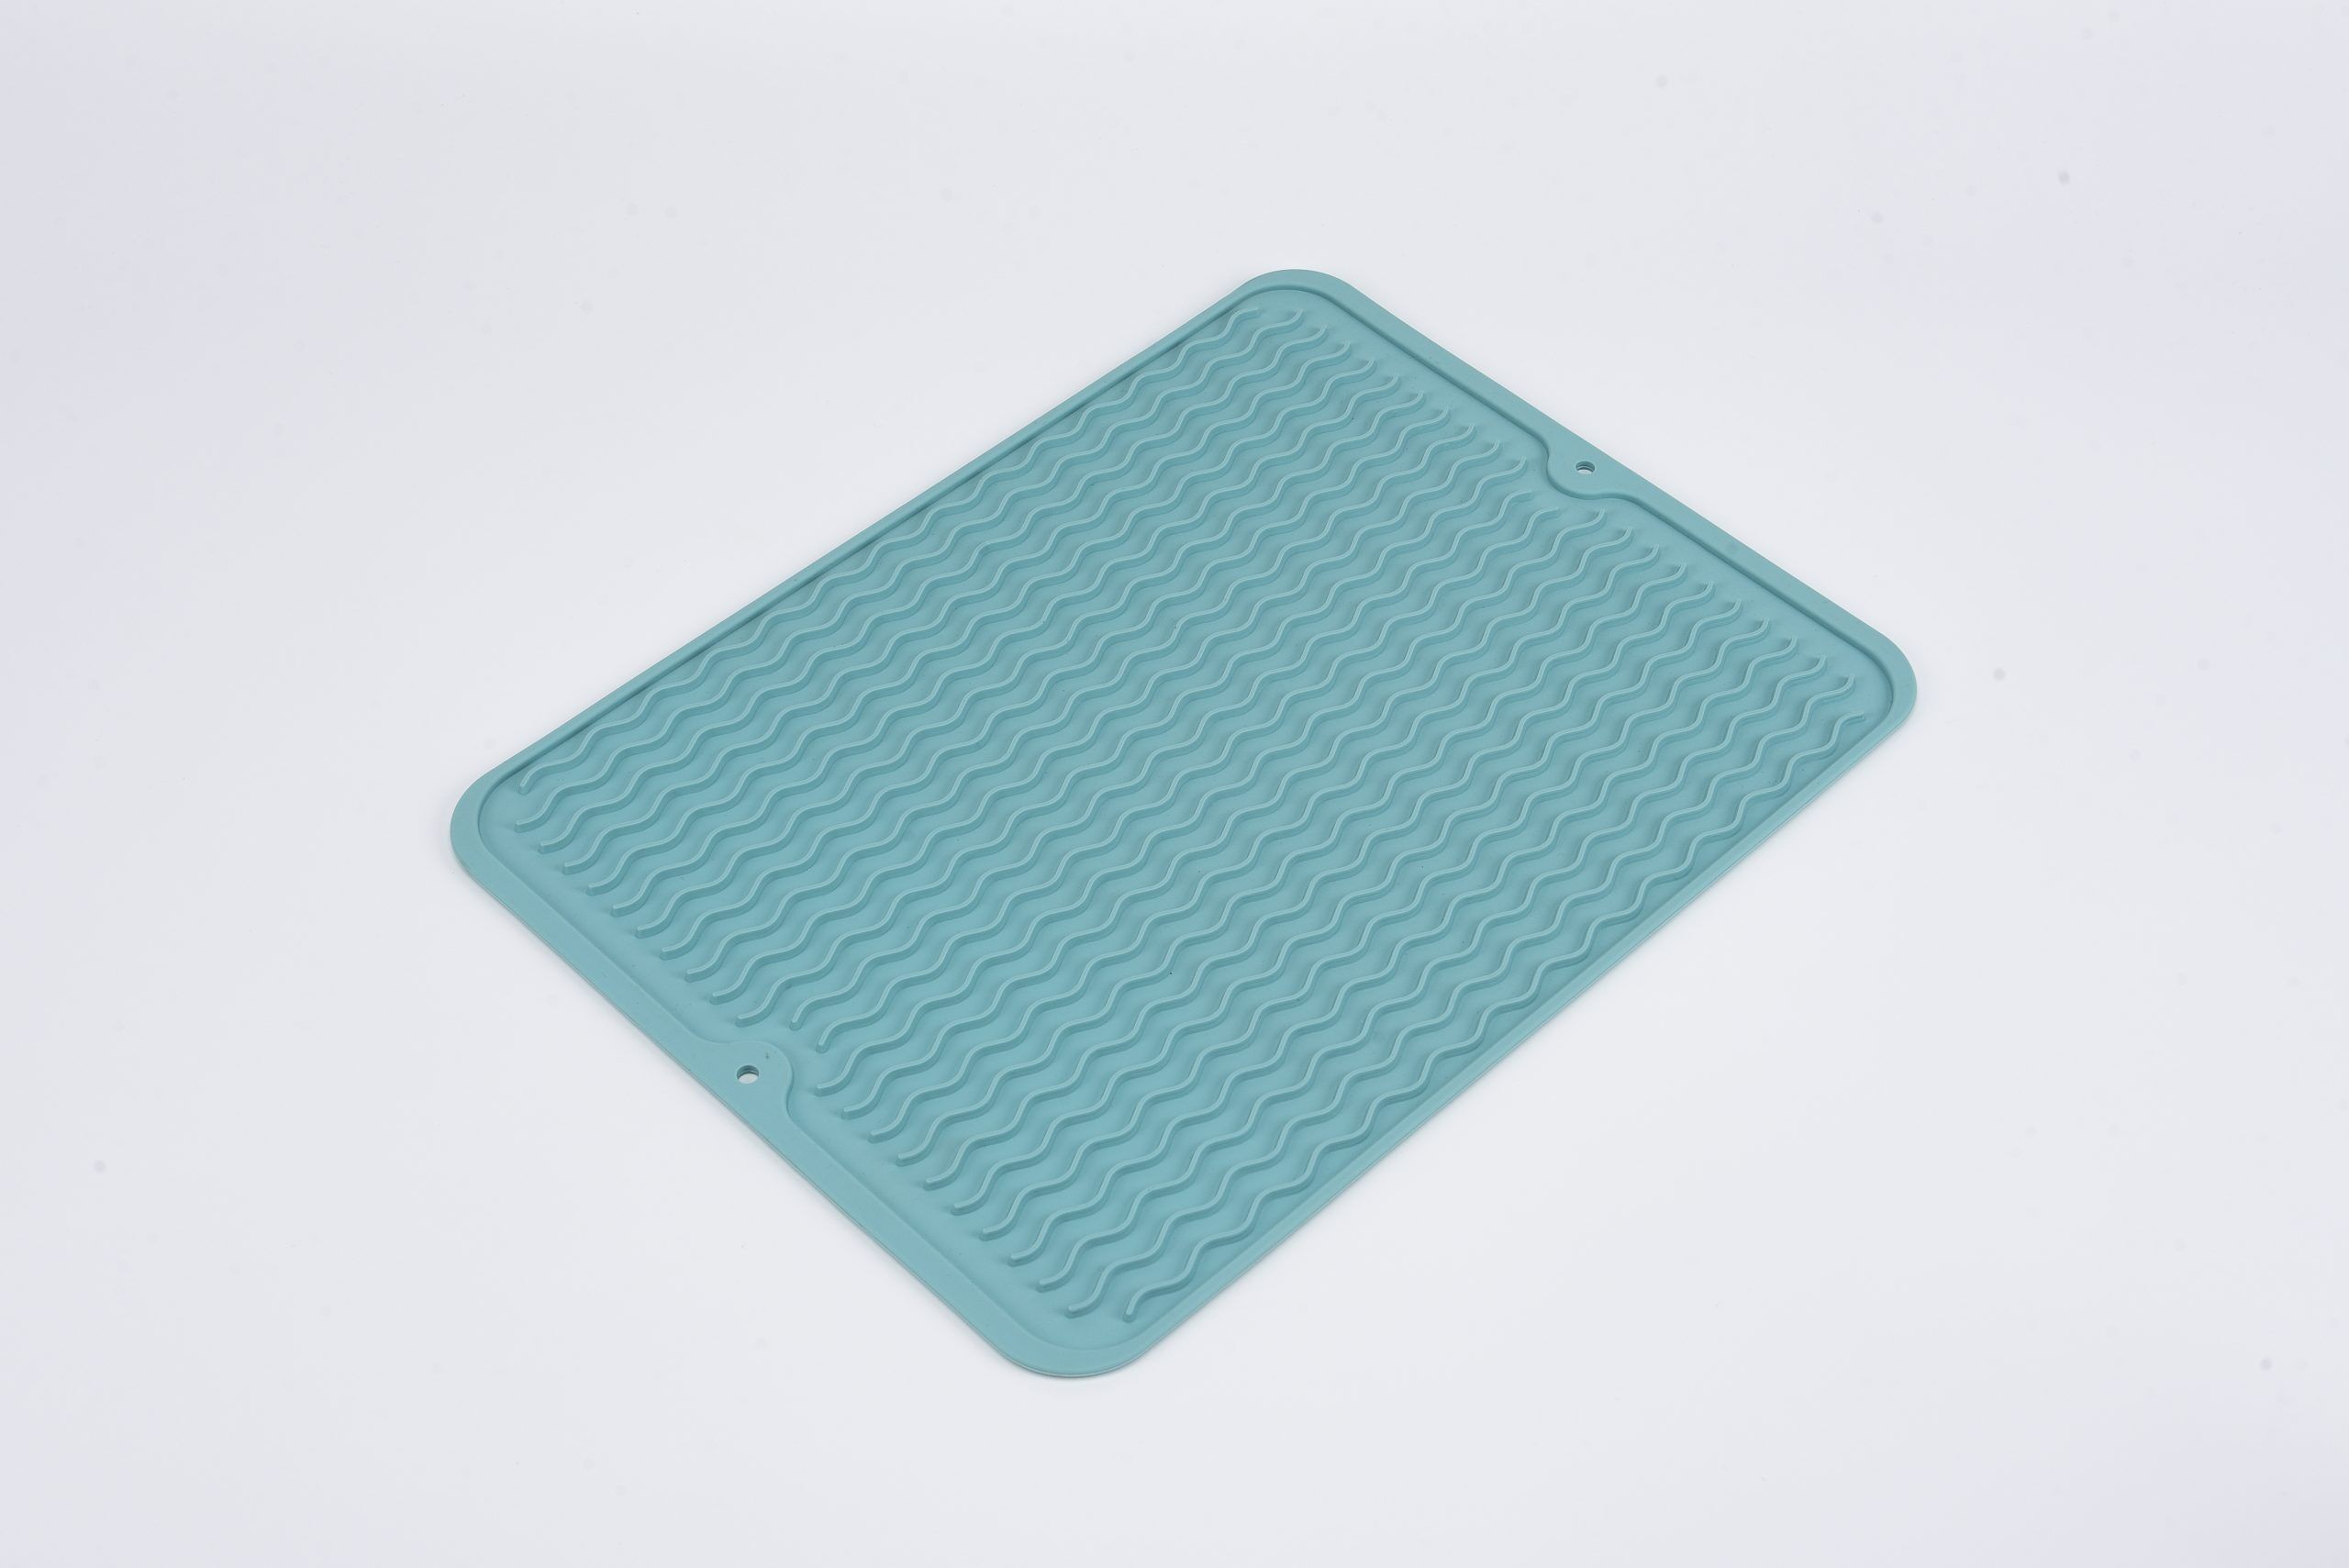 https://cdn-bipfg.nitrocdn.com/aWIusSJHcxaWDfmYObhOXMkIJLZeapra/assets/images/optimized/rev-ff631e6/wp-content/uploads/2021/04/Silicone-Dish-Drying-Mat-for-Sink-and-Counter-scaled.jpg